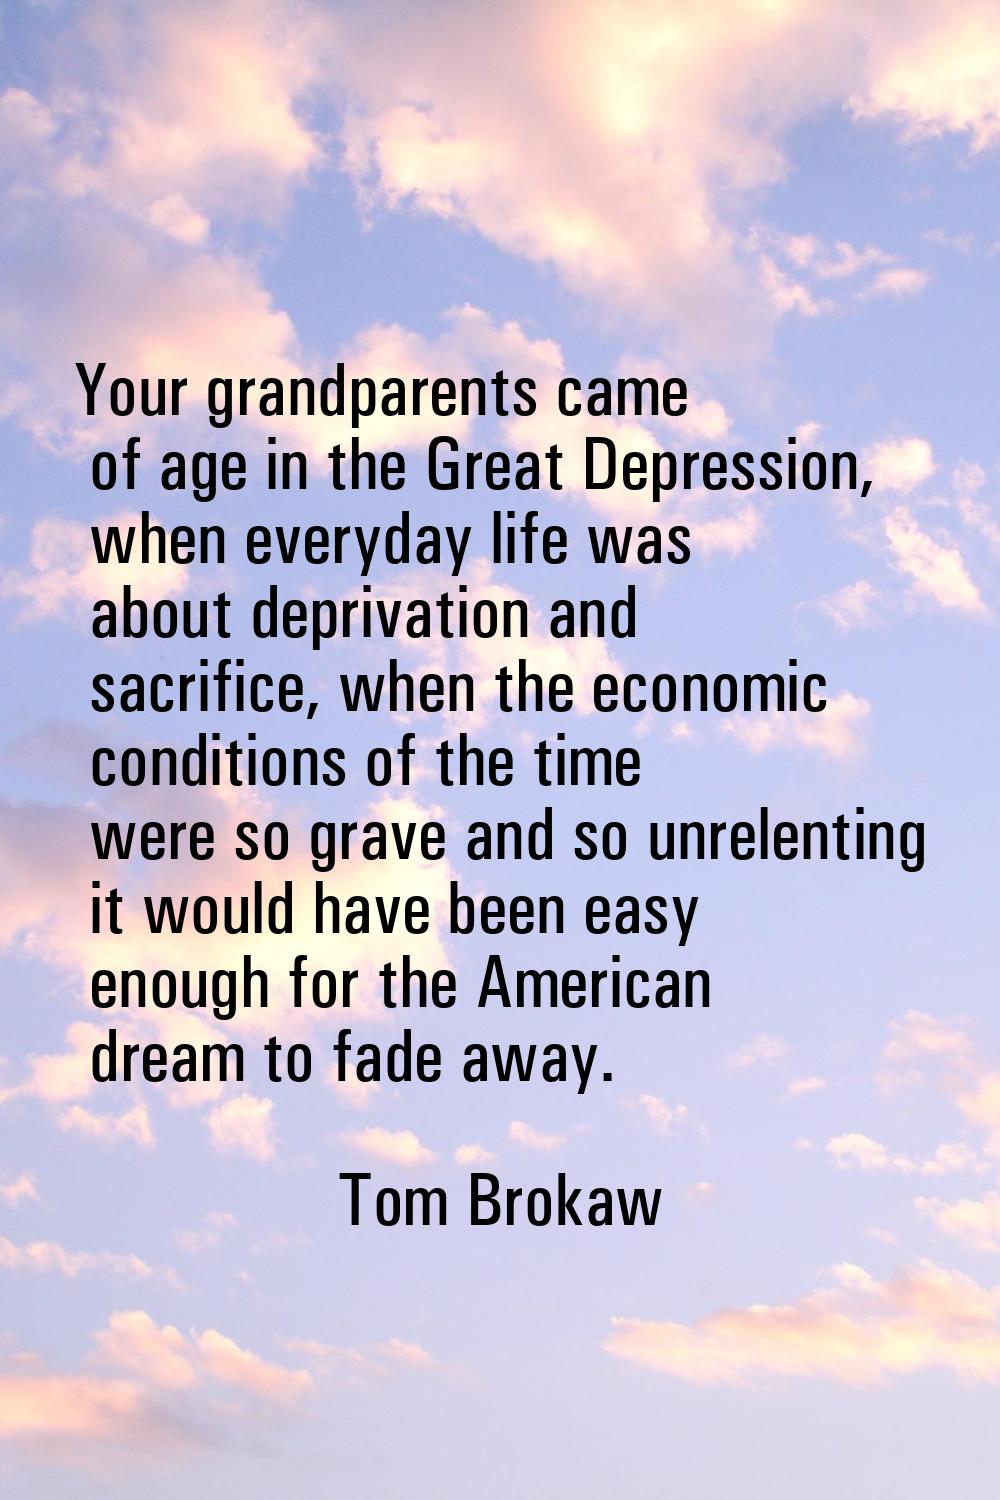 Your grandparents came of age in the Great Depression, when everyday life was about deprivation and